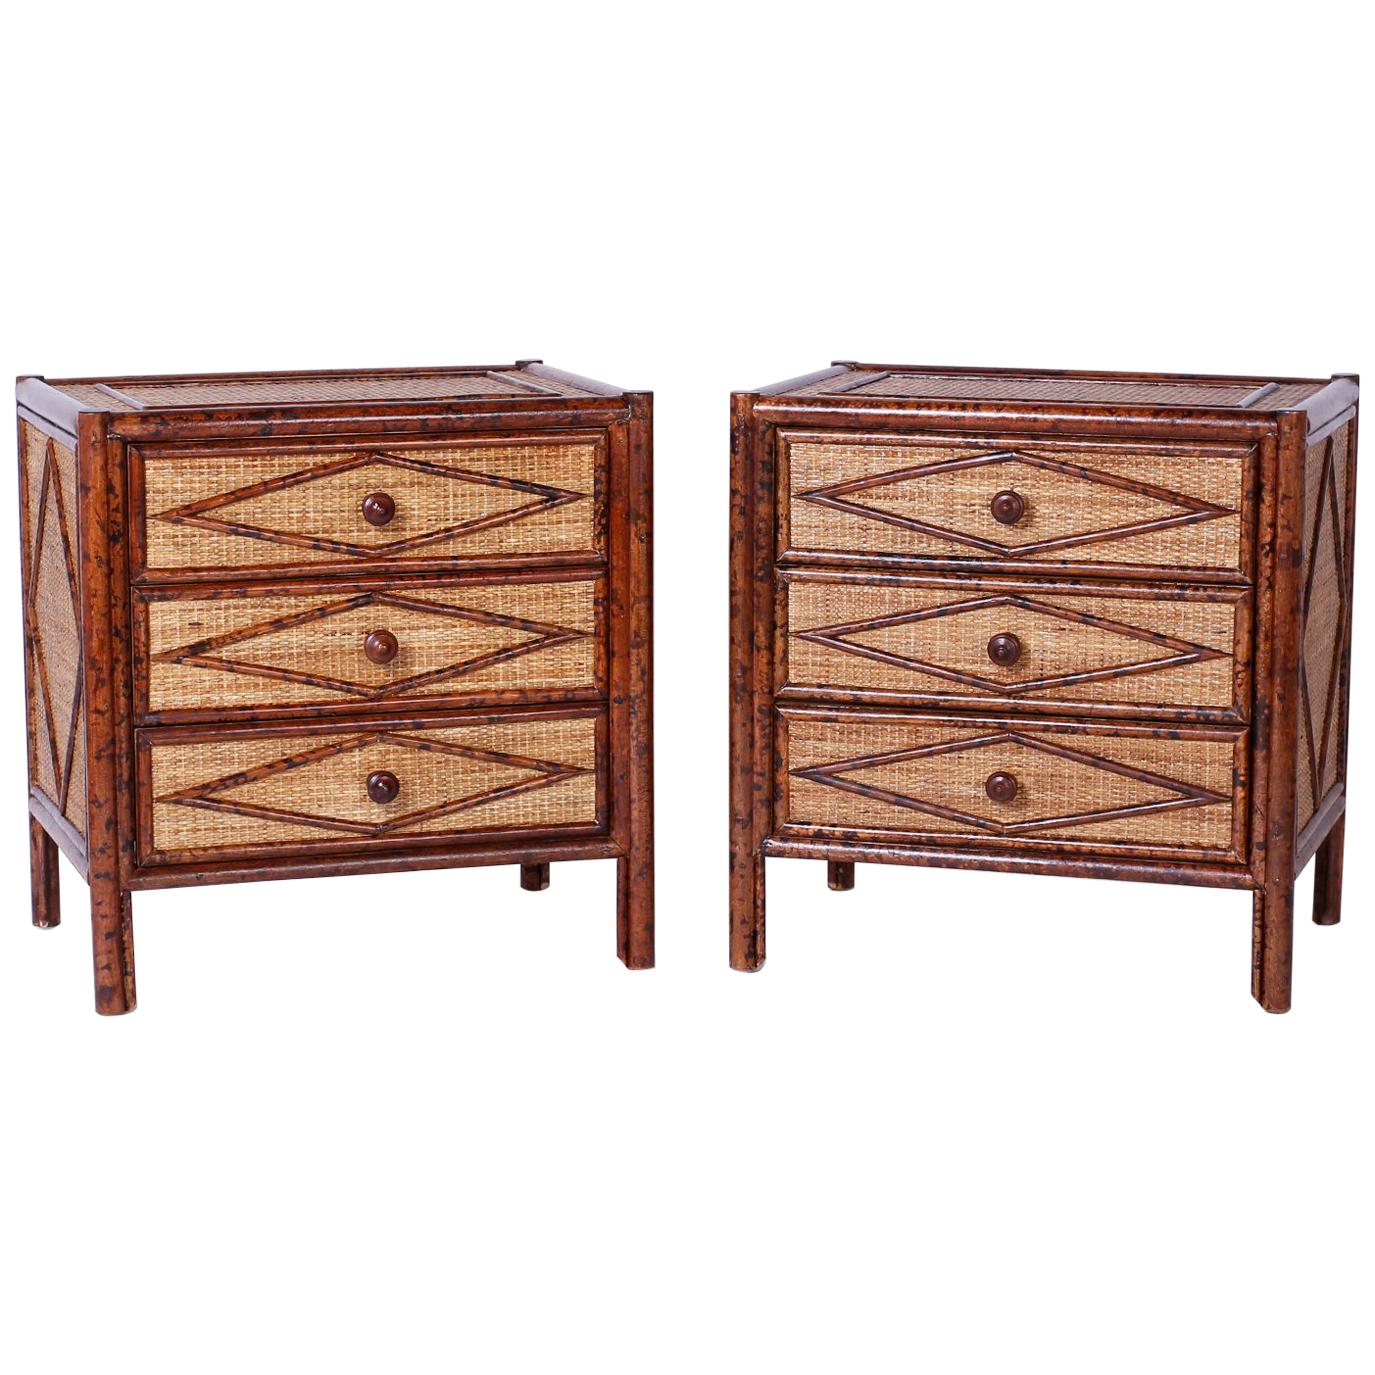 Pair of Midcentury Faux Bamboo Nightstands or Chests